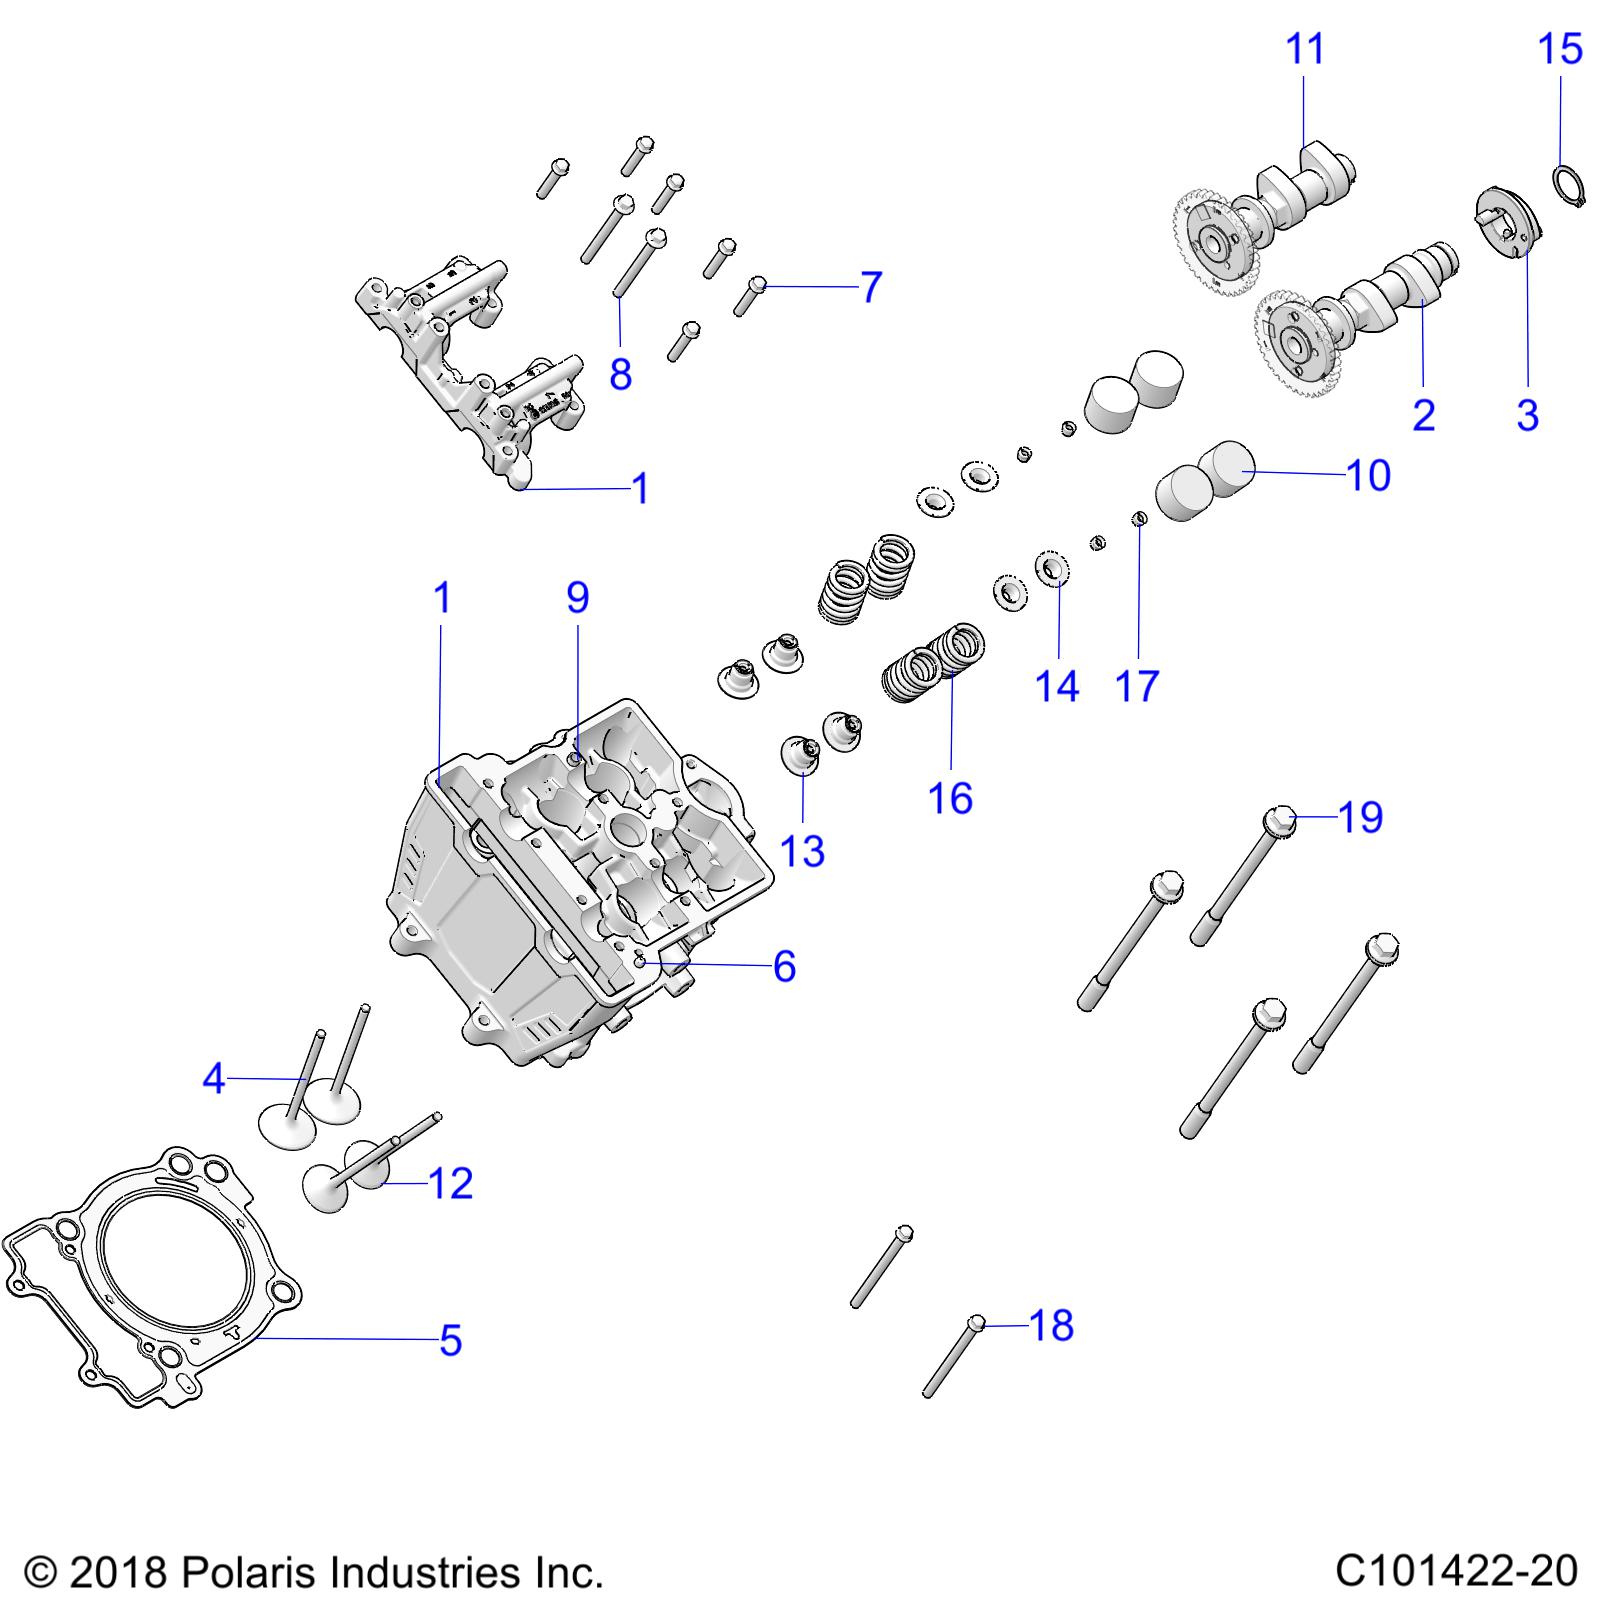 ENGINE, CYLINDER HEAD, CAMS and VALVES - A20SDE57F1/S57C5